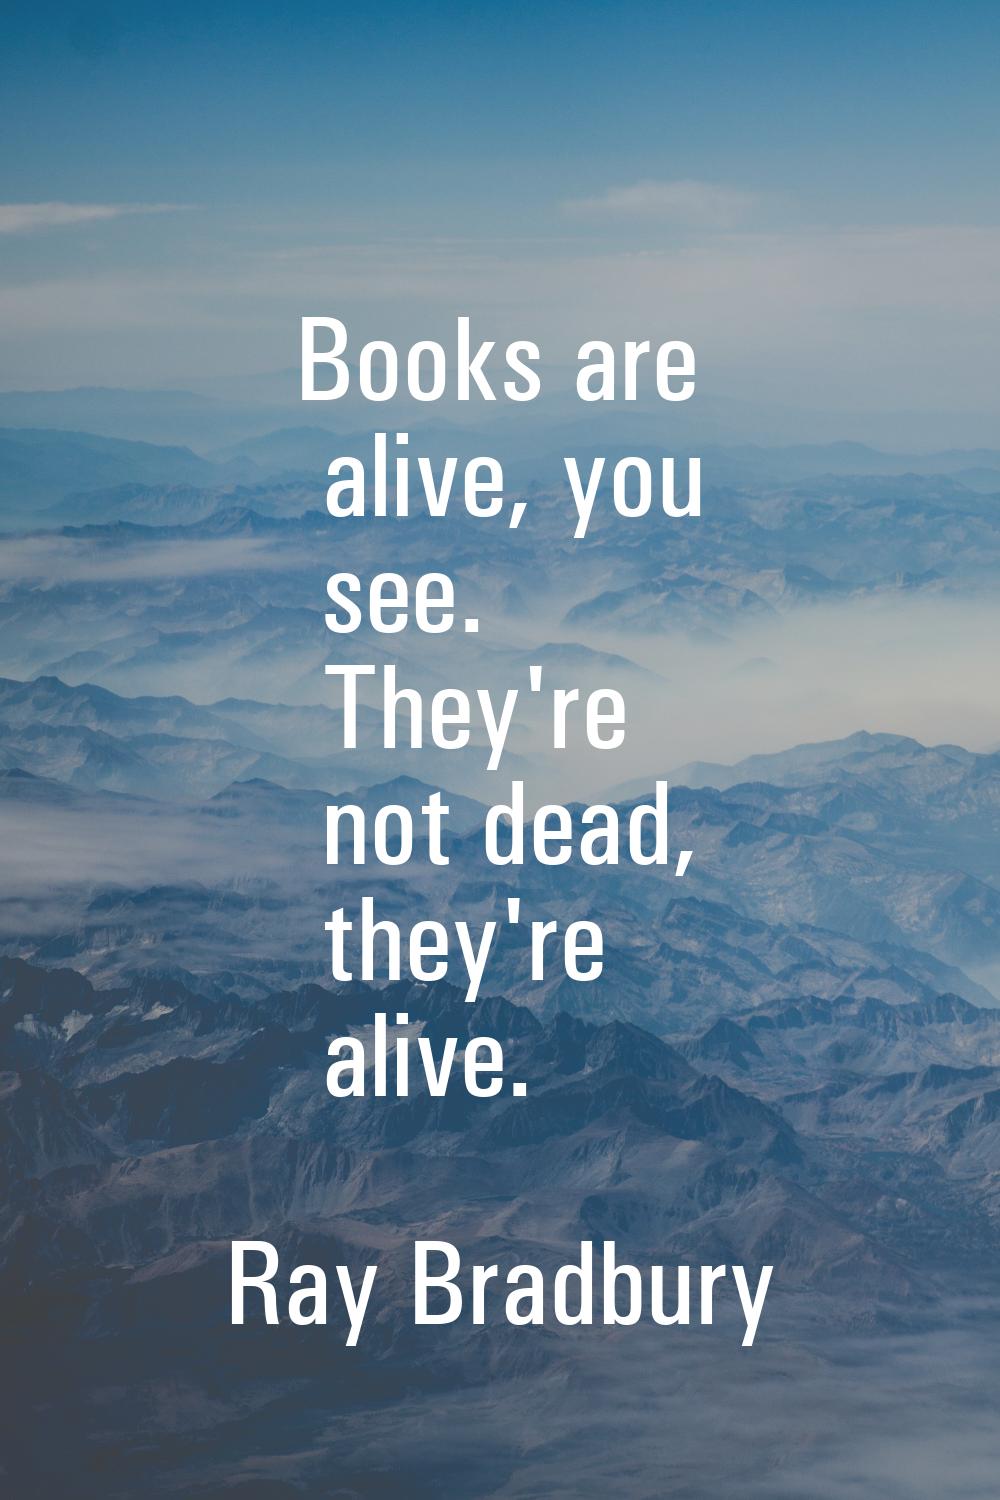 Books are alive, you see. They're not dead, they're alive.